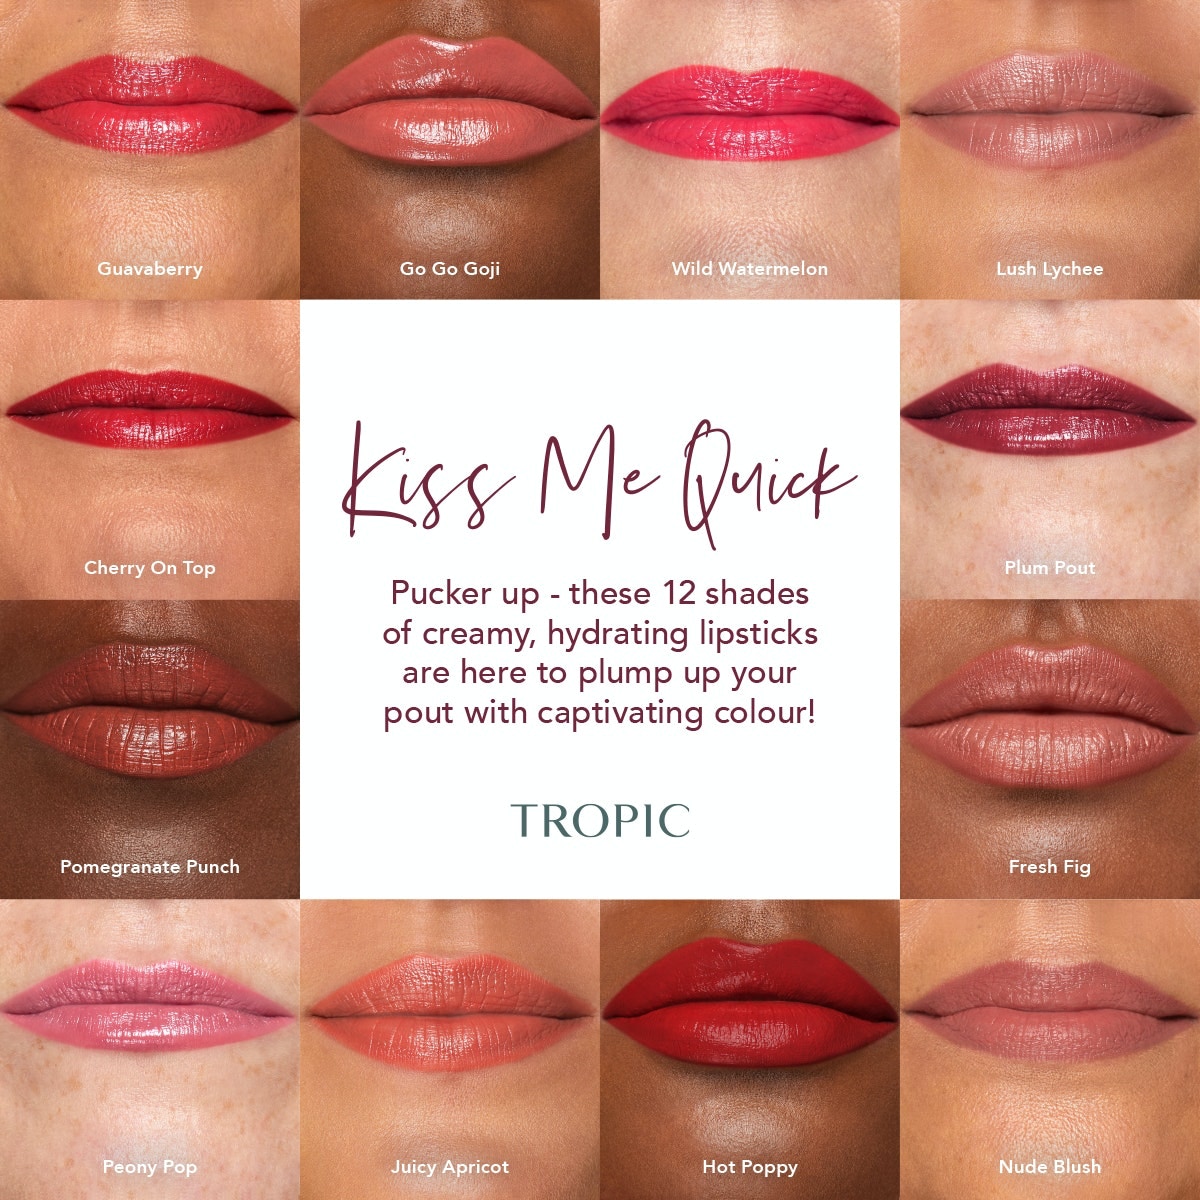 Happy National Lipstick Day 💄To celebrate, enjoy 15% off our range of gorgeous refillable Kiss Me Quick lipsticks & Refill cartridges TODAY ONLY 💋 DM or order here shop.ami.co/claire-nickels… #LoveTropic #NationalLipstickDay #RefillableMakeup #VeganLipstick #TodayOnly #TropicEssex